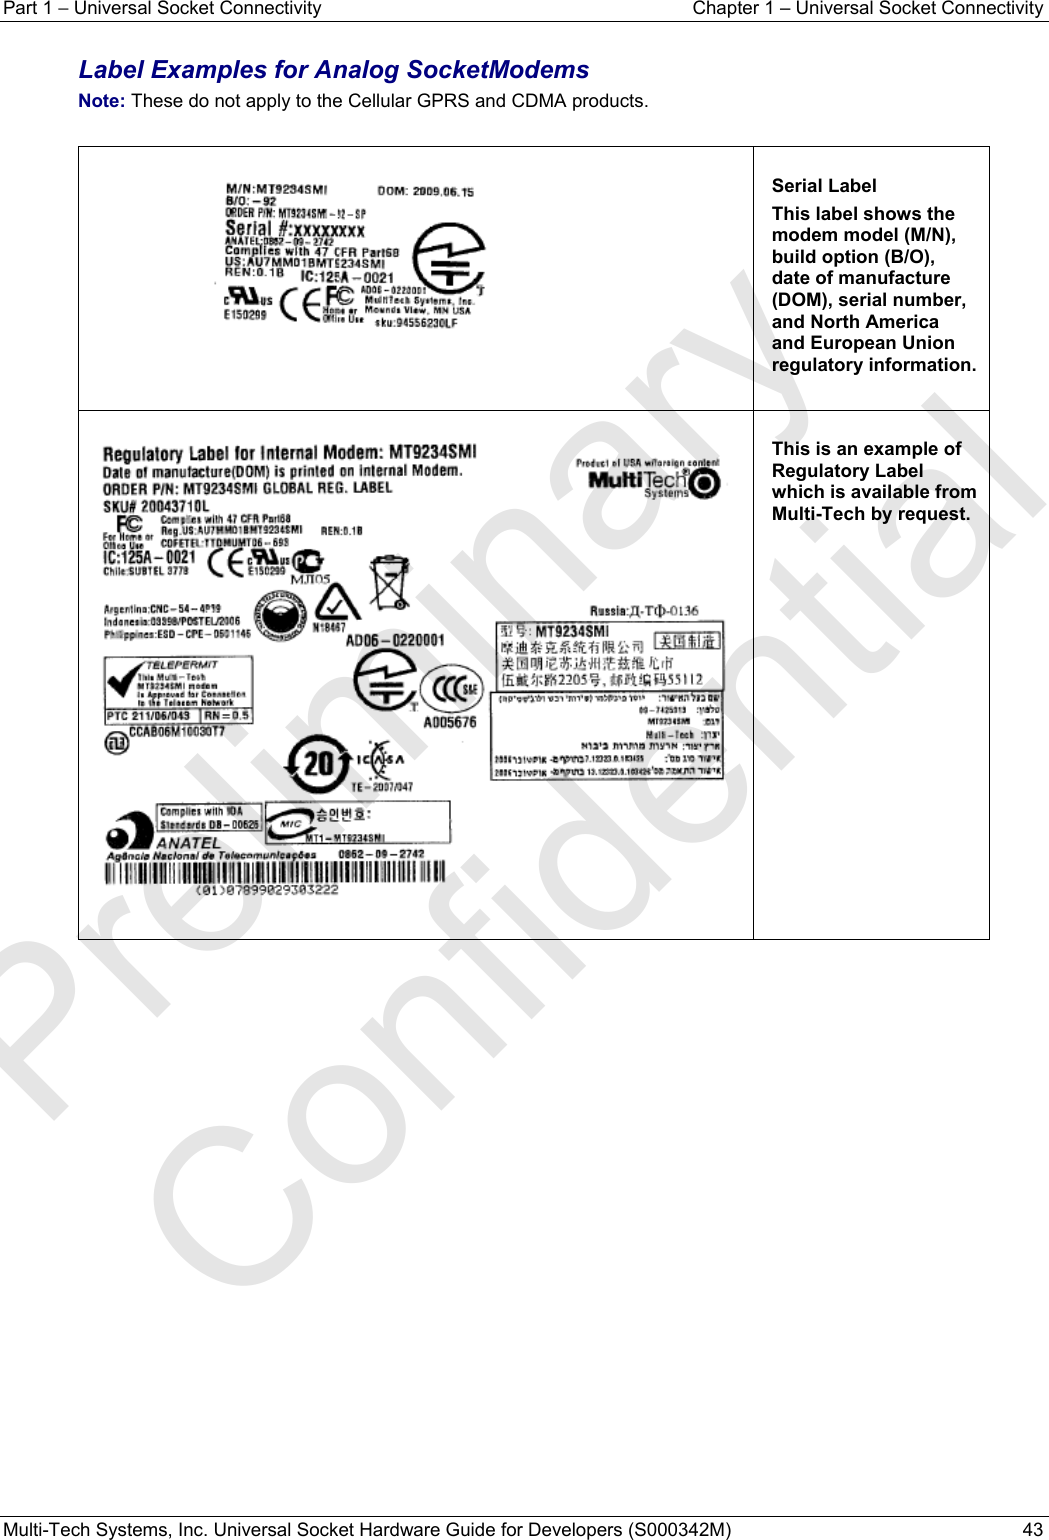 Part 1 − Universal Socket Connectivity  Chapter 1 – Universal Socket Connectivity Multi-Tech Systems, Inc. Universal Socket Hardware Guide for Developers (S000342M)  43  Label Examples for Analog SocketModems  Note: These do not apply to the Cellular GPRS and CDMA products.    Serial Label This label shows the modem model (M/N), build option (B/O), date of manufacture (DOM), serial number, and North America and European Union regulatory information.   This is an example of Regulatory Label which is available from Multi-Tech by request.      Preliminary  Confidential